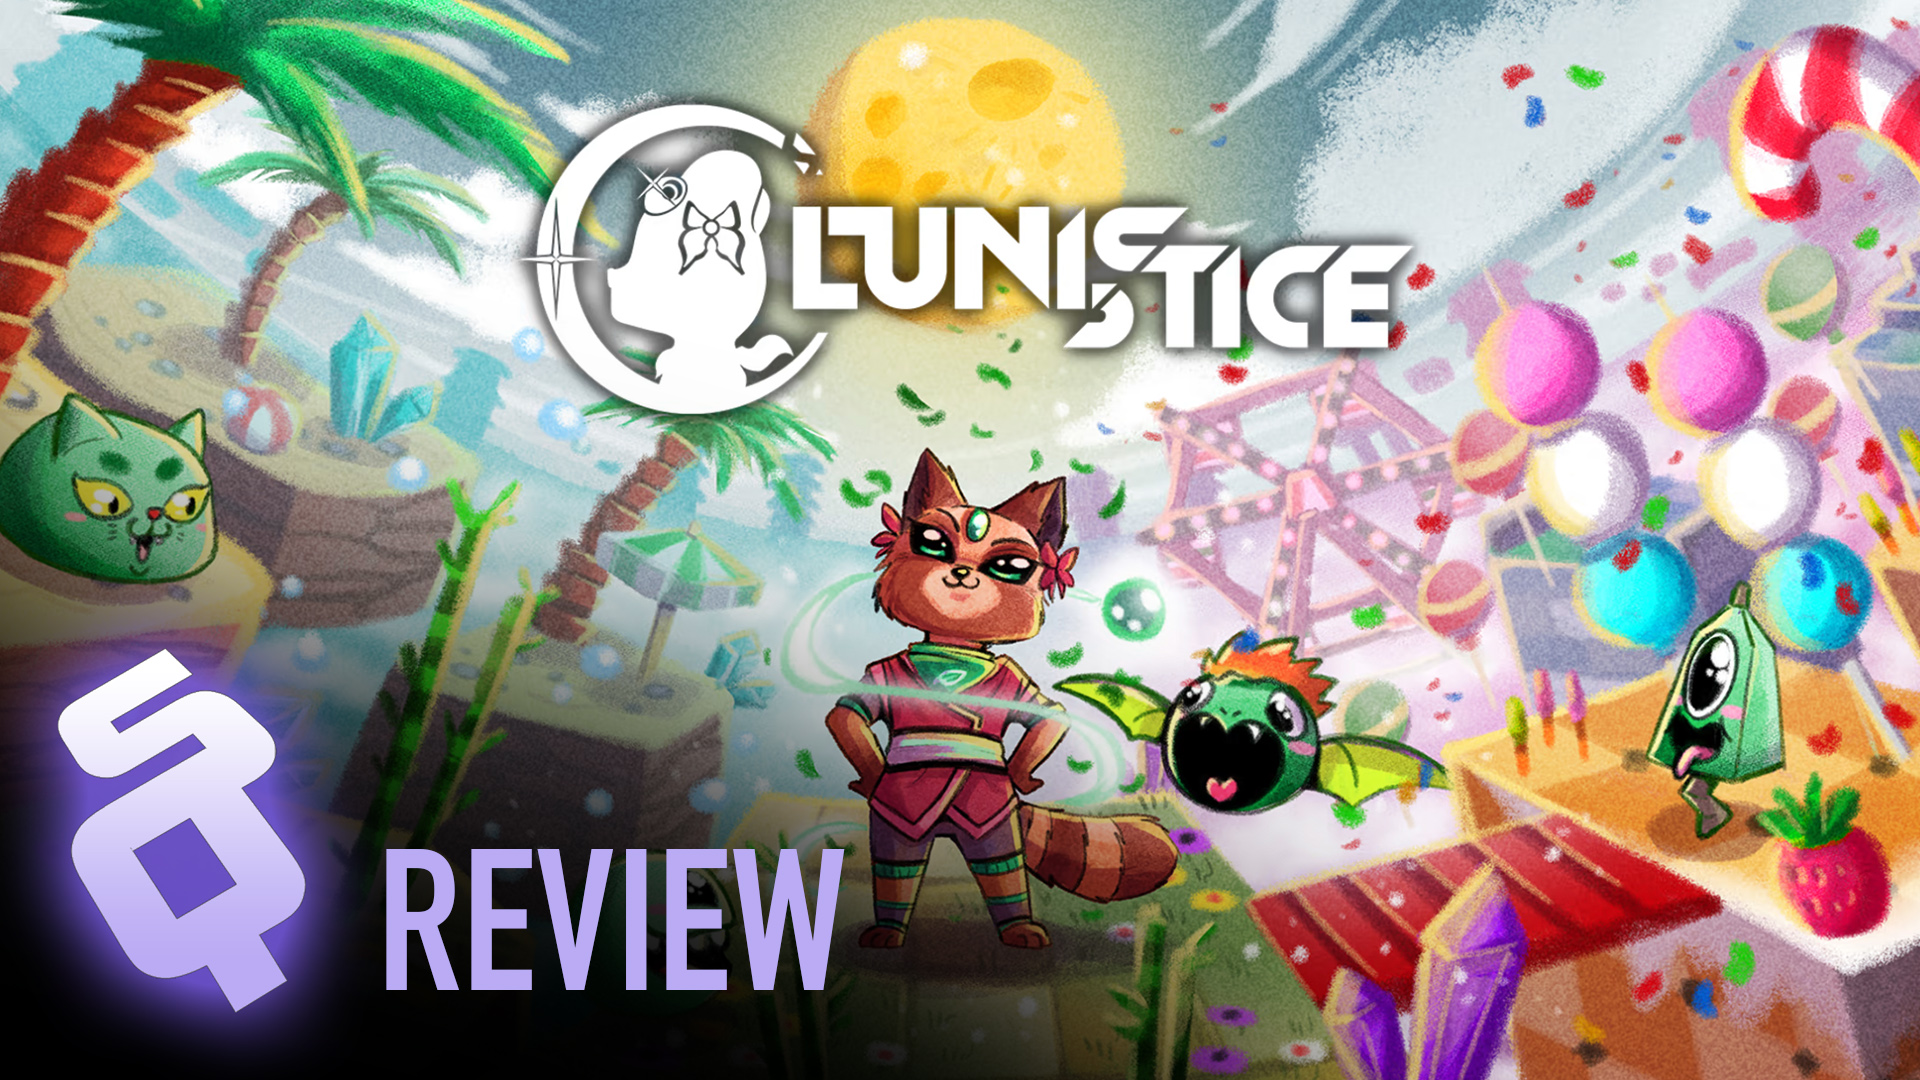 Lunistice review